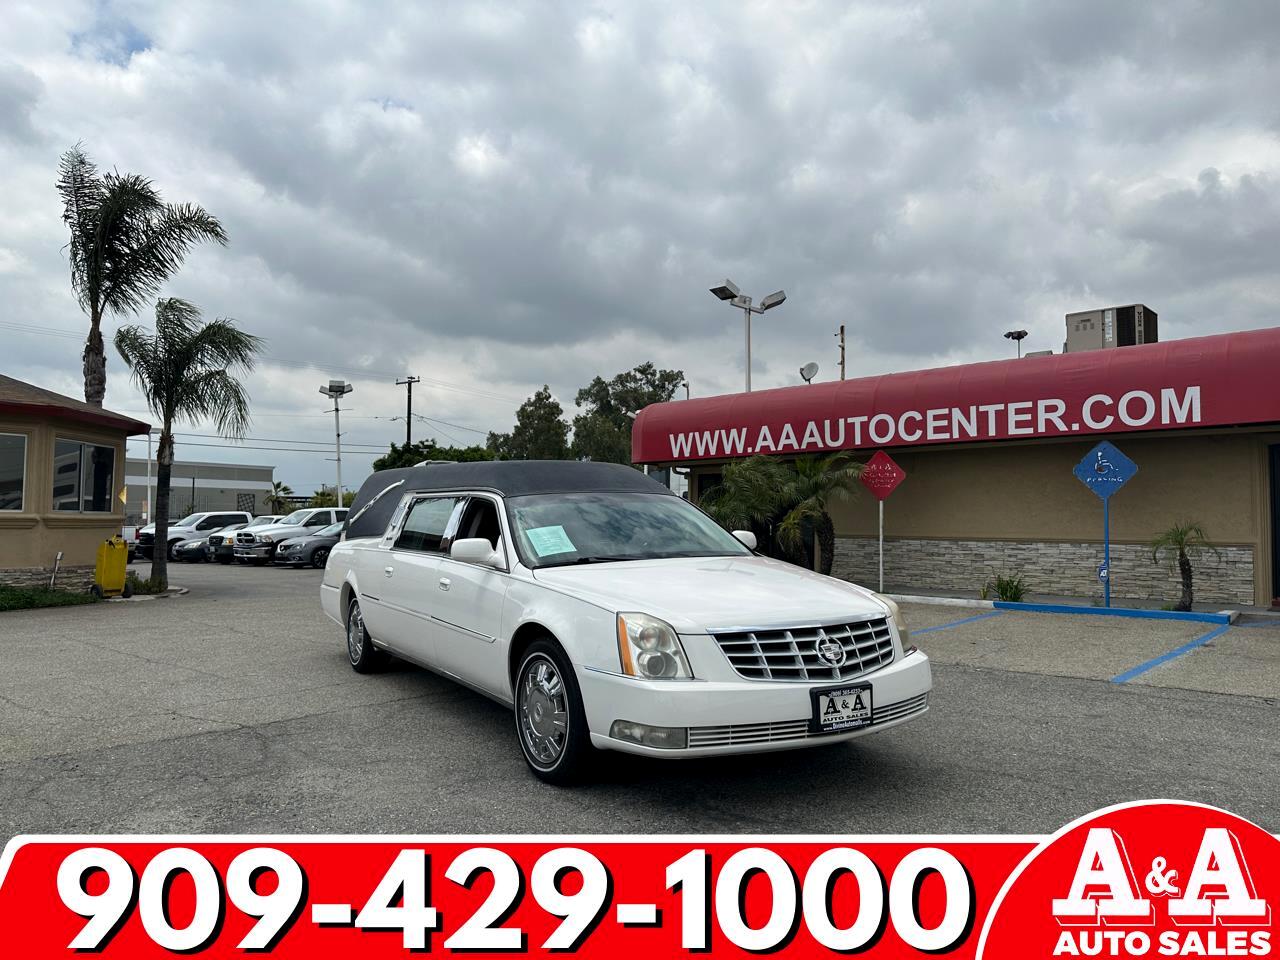 2011 Cadillac DTS Professional 4dr Sdn Funeral Coach